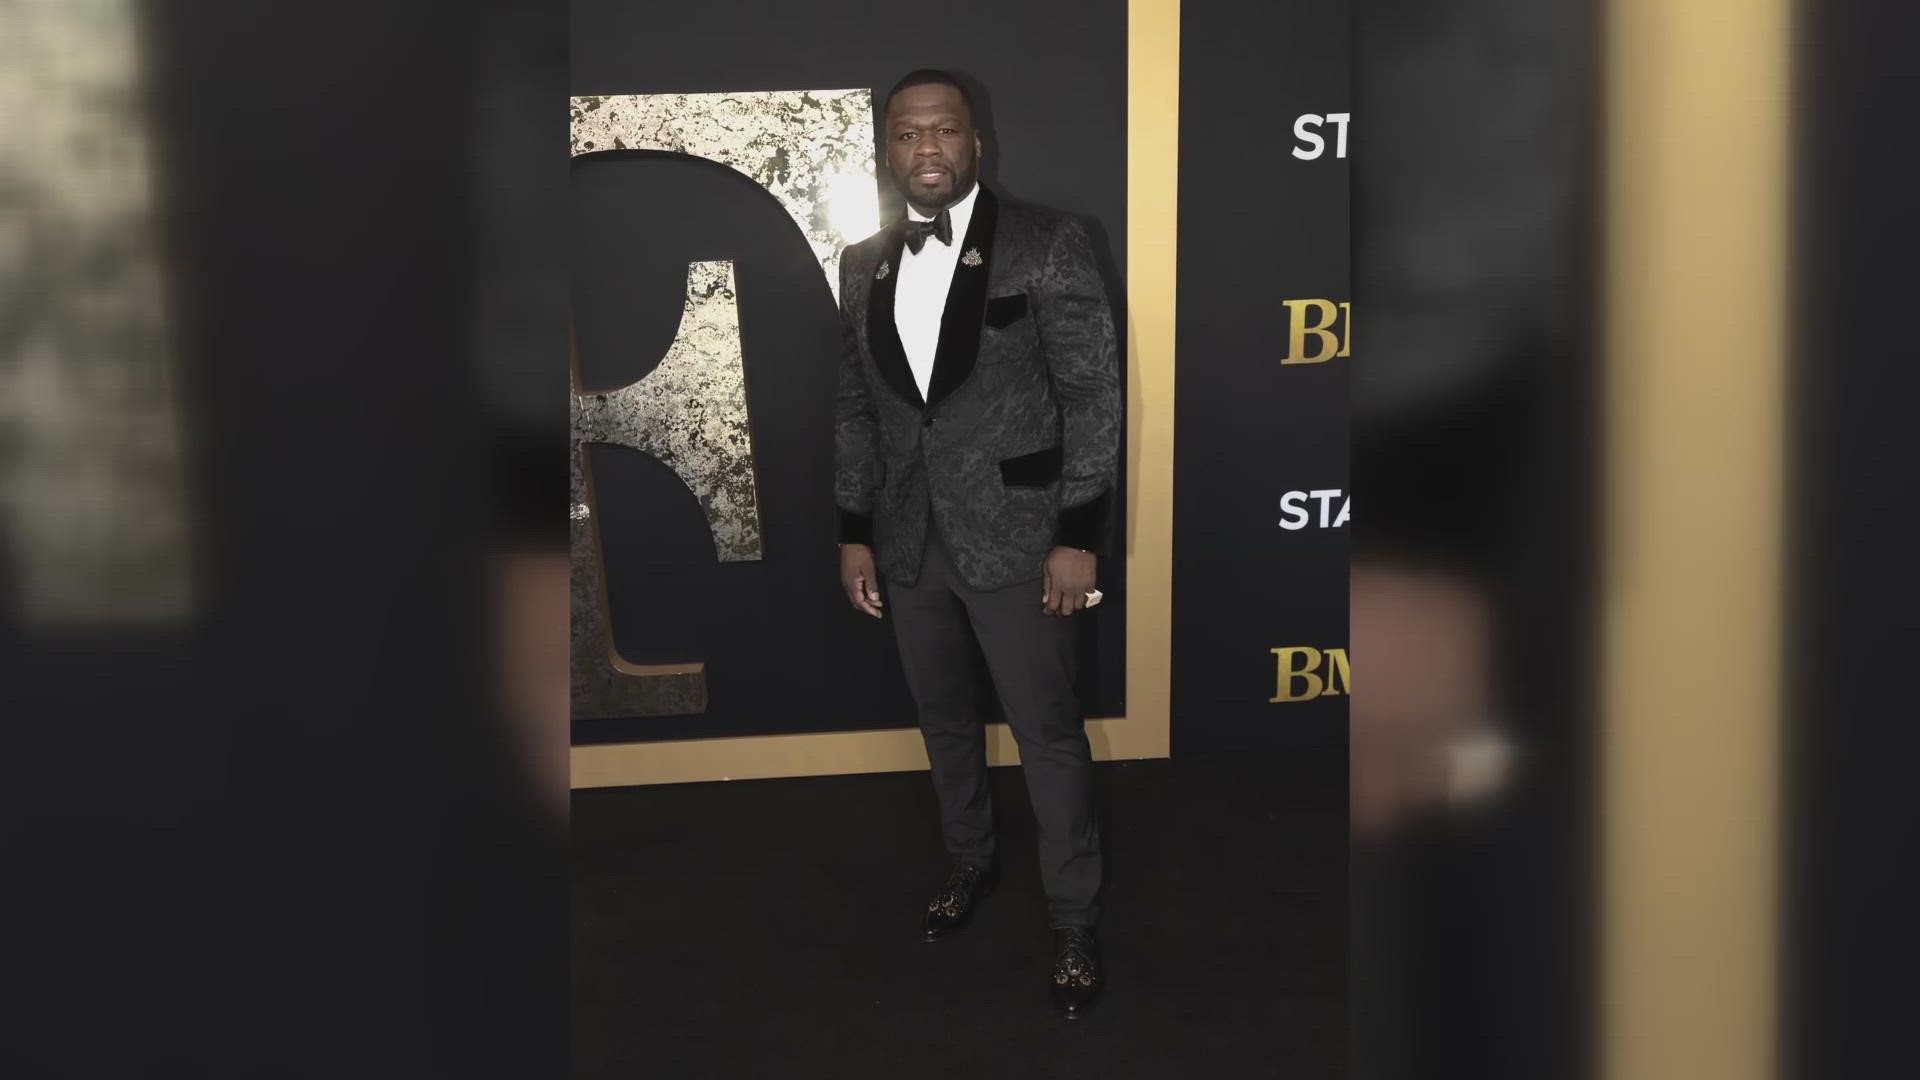 Several celebrities, including executive producer 50 Cent, graced the stage after the new STARZ series premiere.